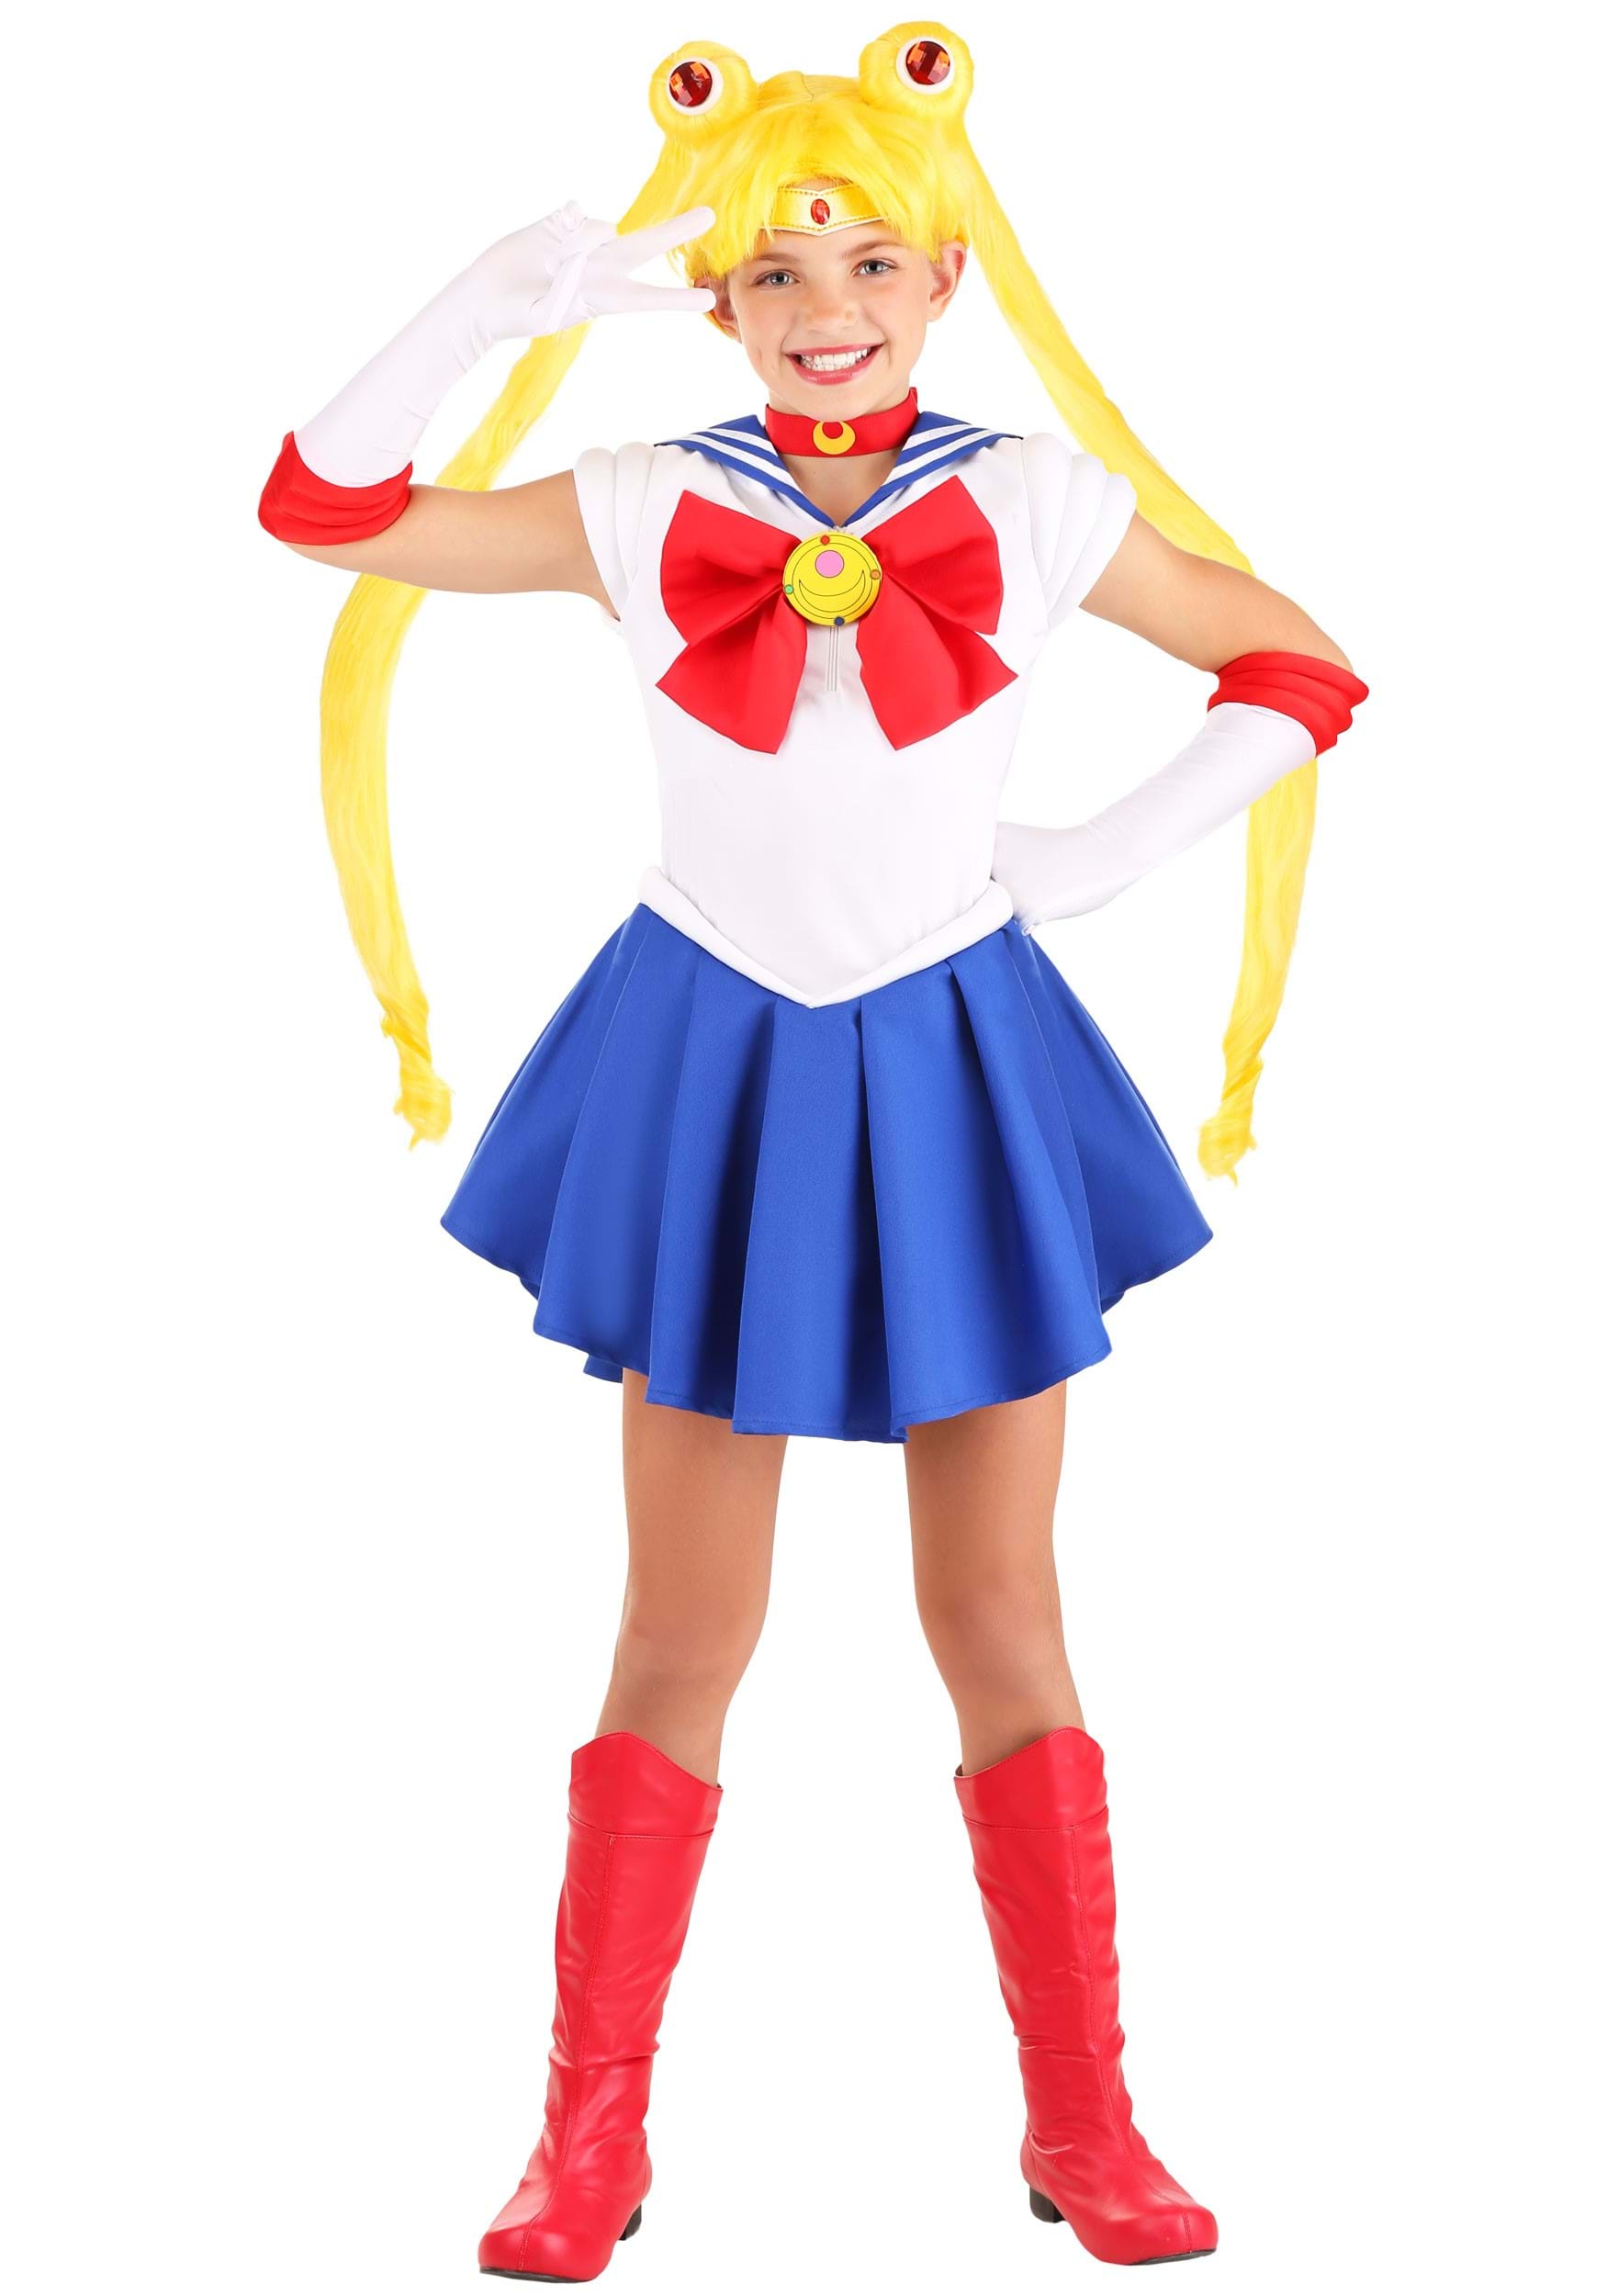 Photos - Fancy Dress MOON FUN Costumes Girl's Sailor  Costume Blue/Red/White 